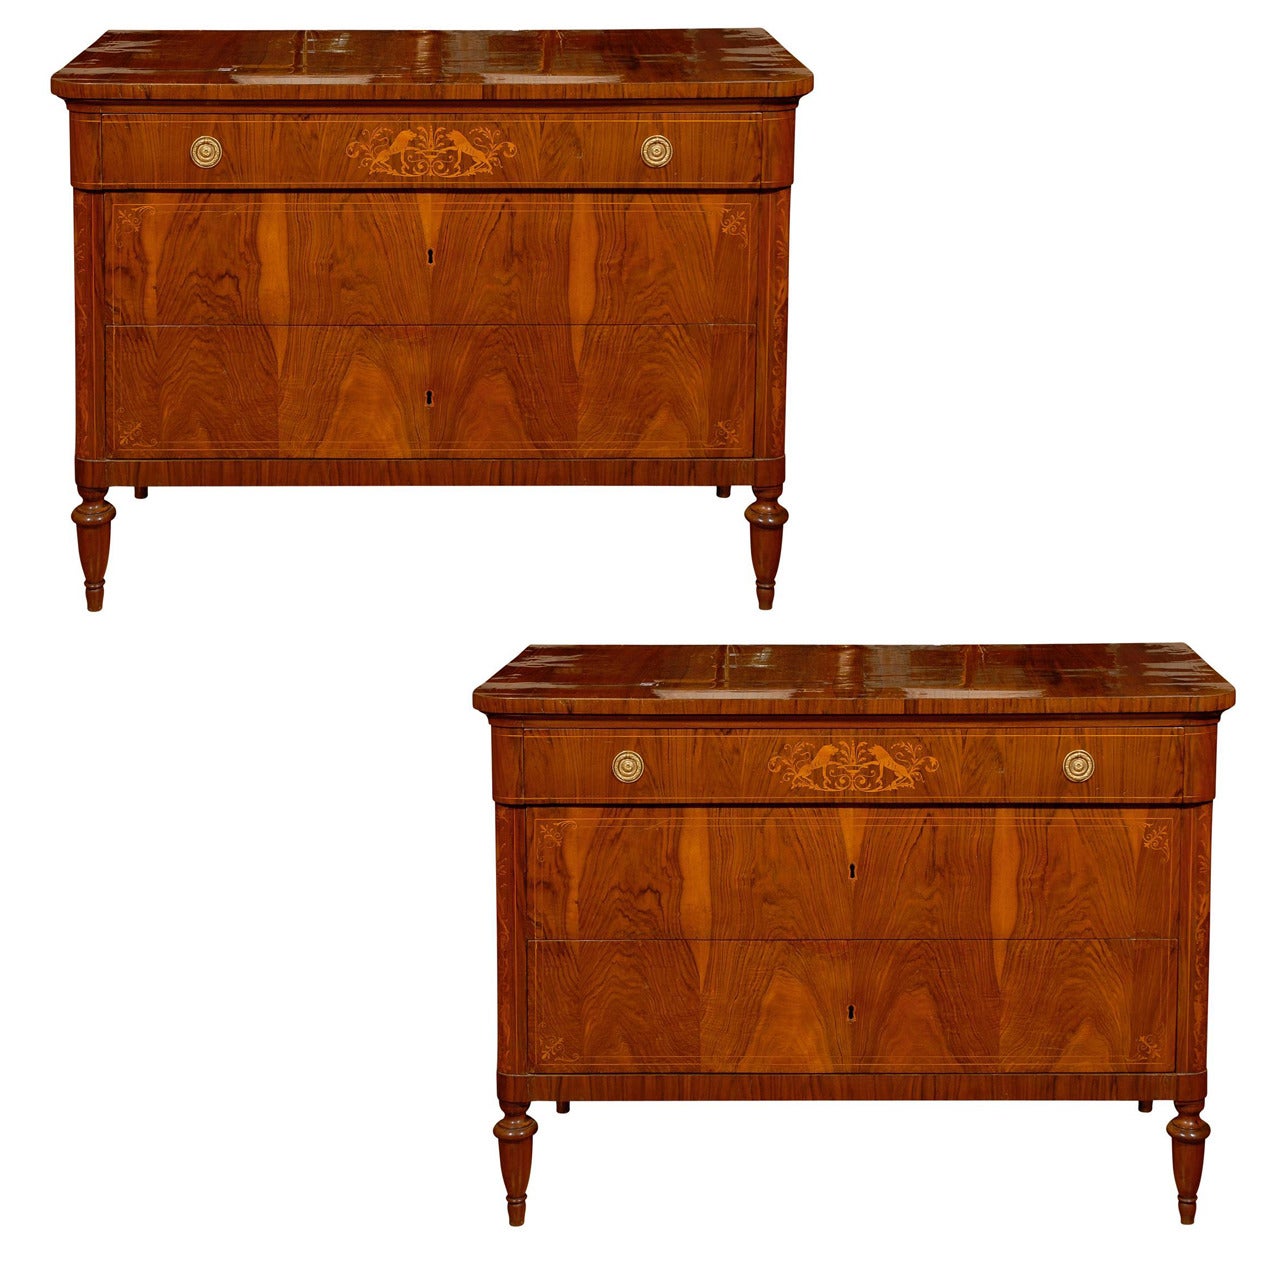 Pair of Neoclassical Three-Drawer Commodes with Marquetry from Tuscan Estate.